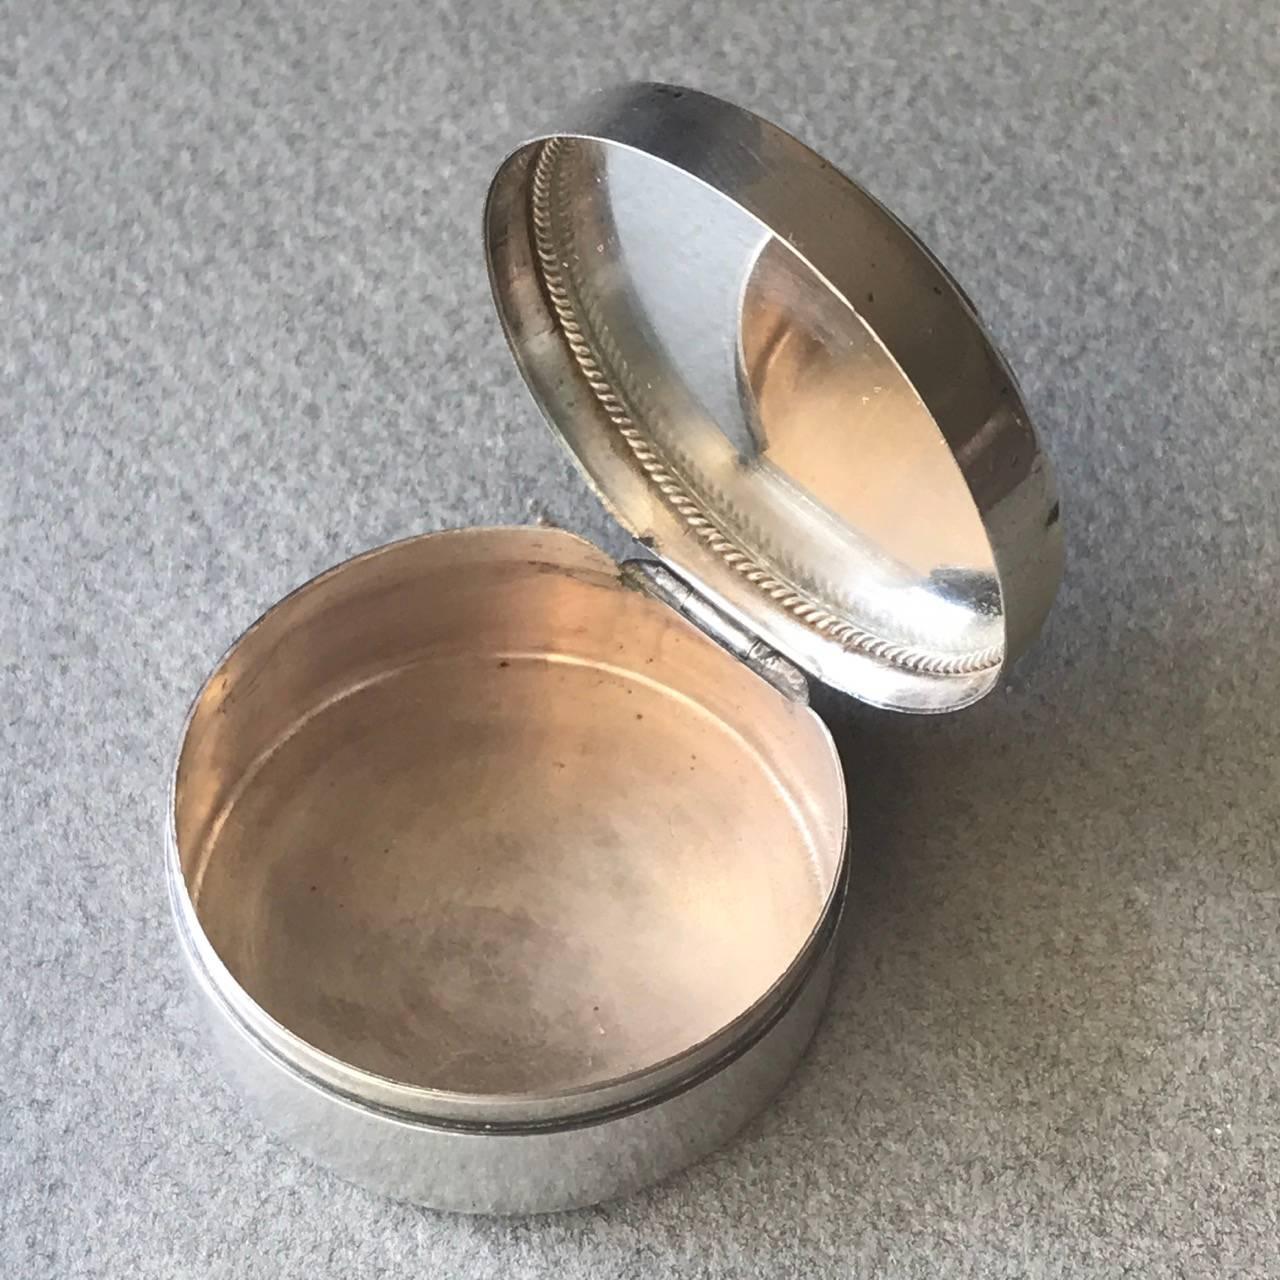 Georg Jensen sterling silver compact

A Classic Art Nouveau style petit compact made by Jensen in the 1930s. The round body having raised decoration and hinged lid inset with malachite cabochons to the top and a mirror to the interior. Charming.